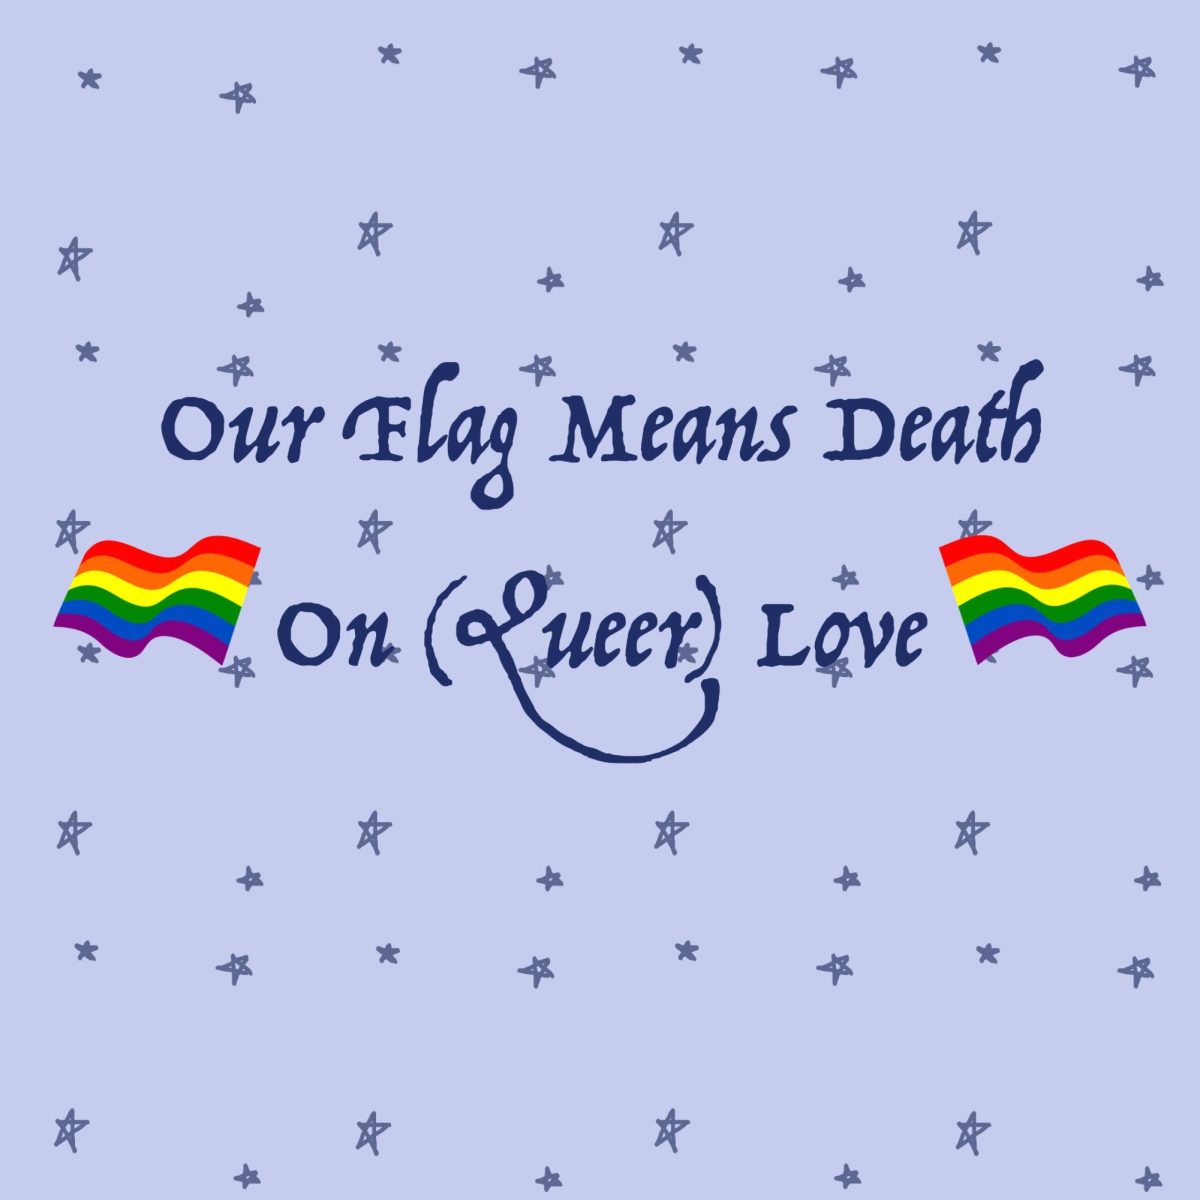 Our+flag+means+death+on+queer+love